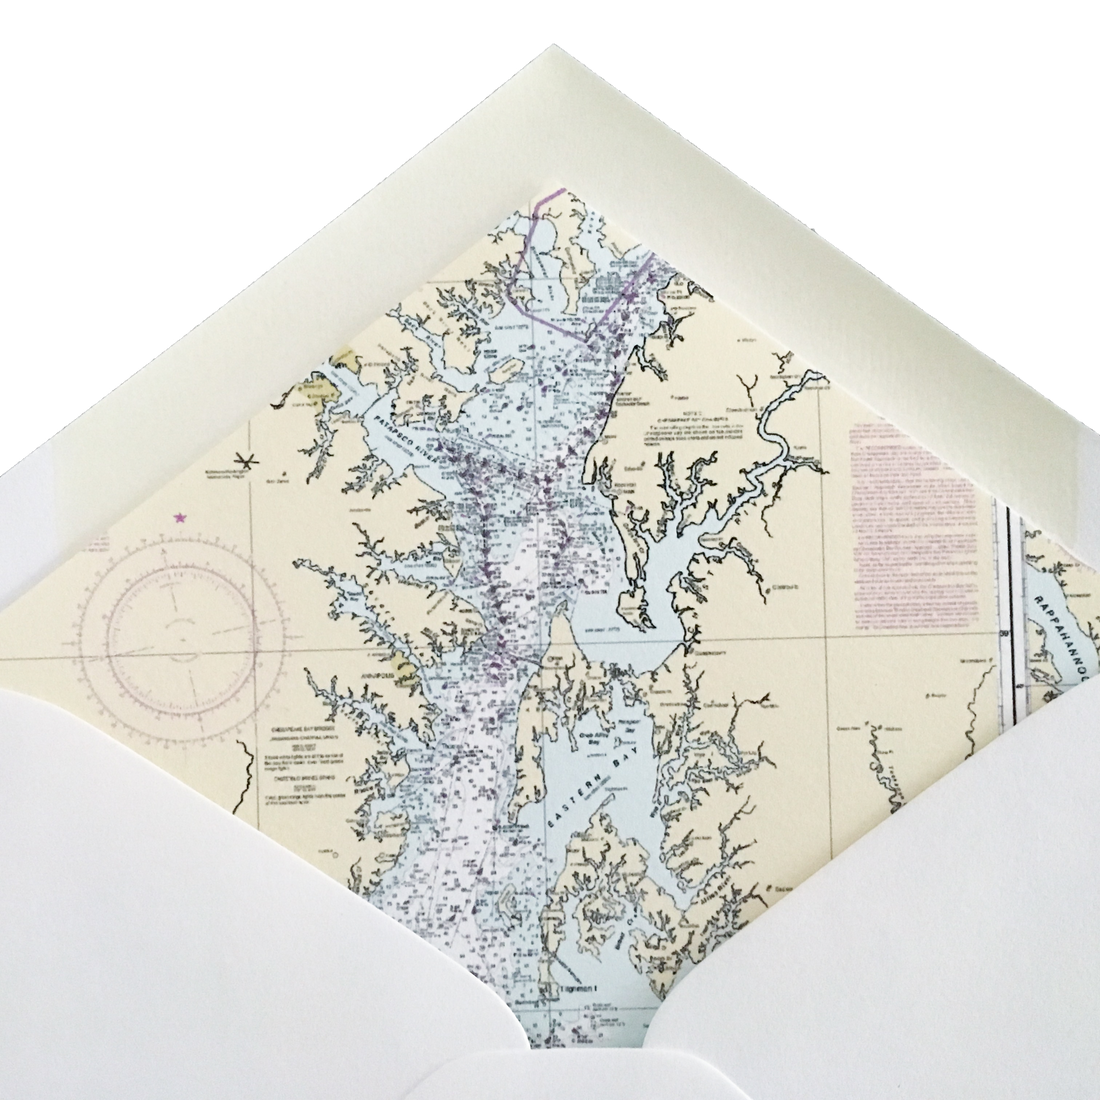 Crab Letterpress Cards with Chesapeake Bay Nautical Chart Envelope Liners, Set of 6